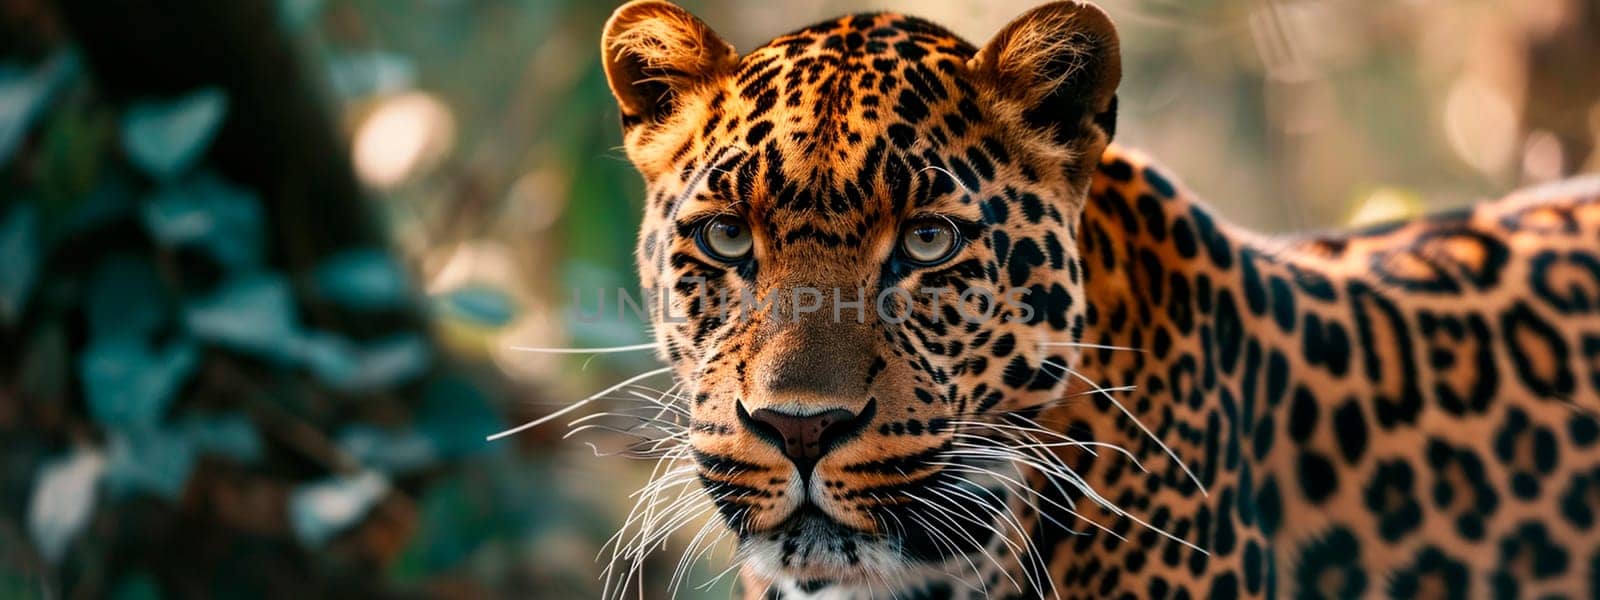 portrait of a leopard in nature. Selective focus. animal.